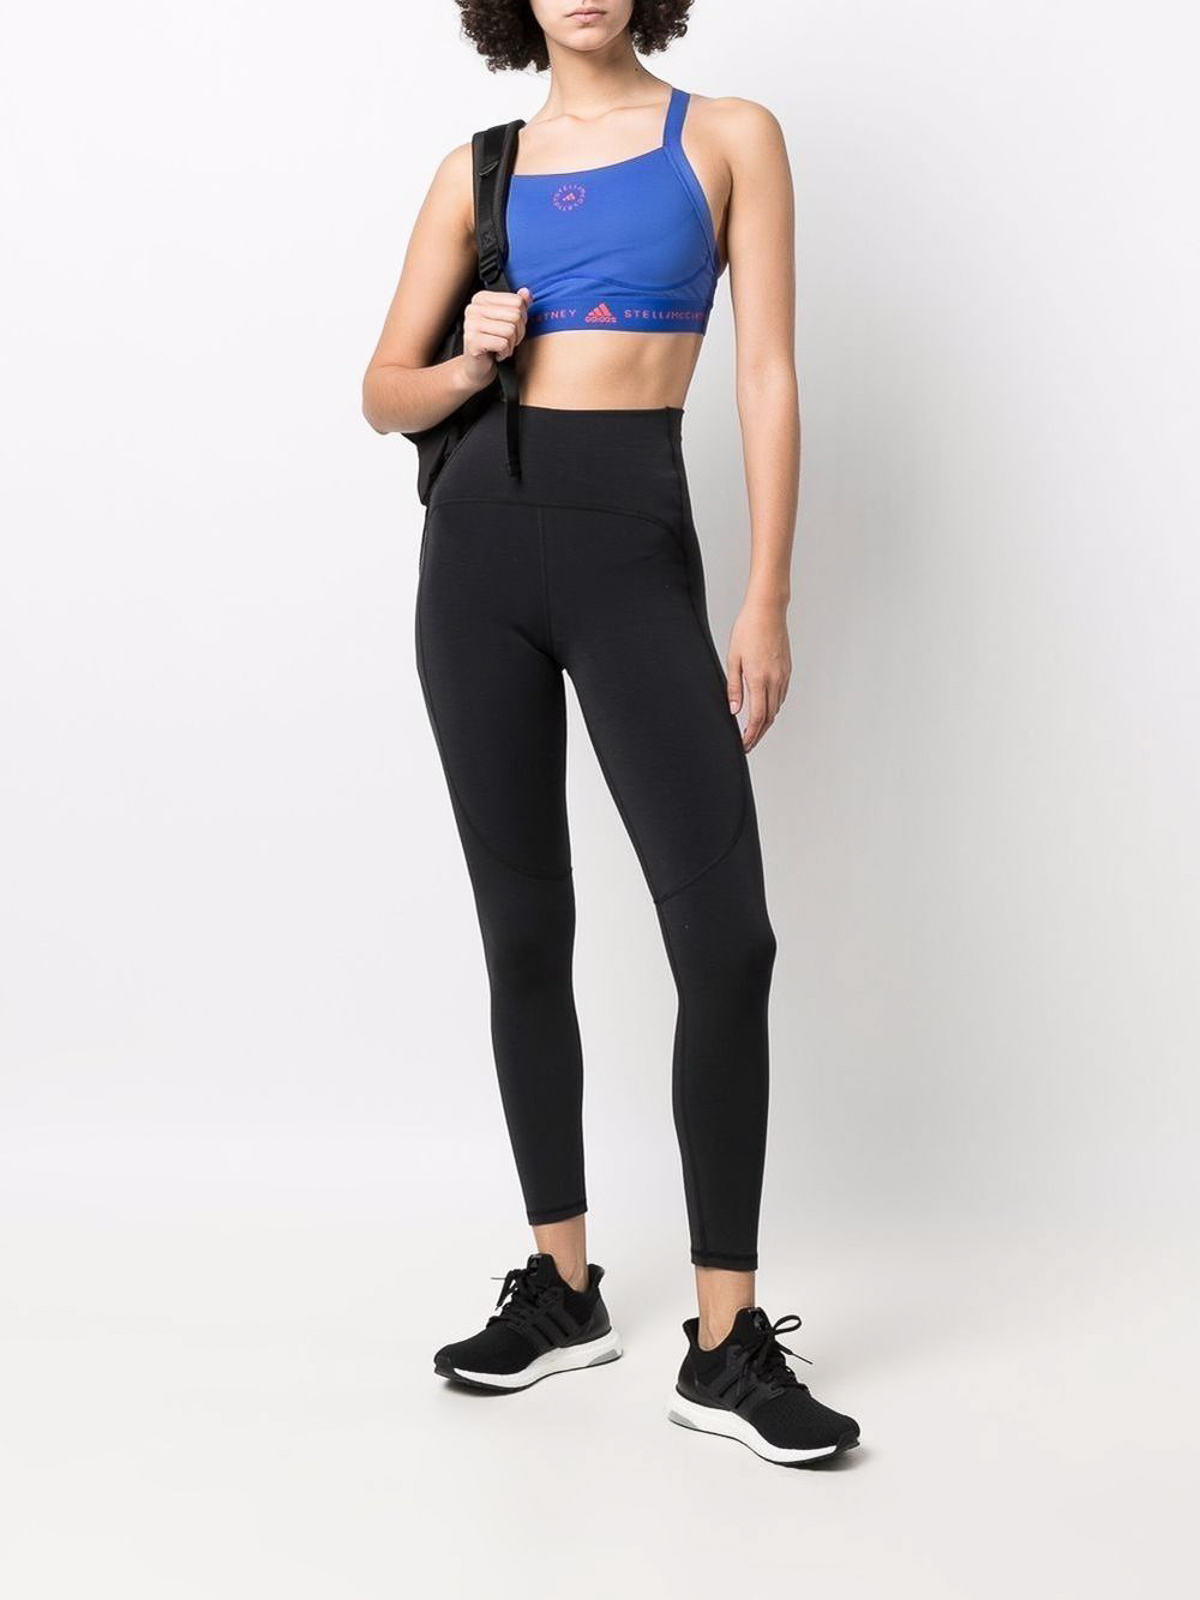 Buy Genuine Adidas Running Tights Online At Best Prices